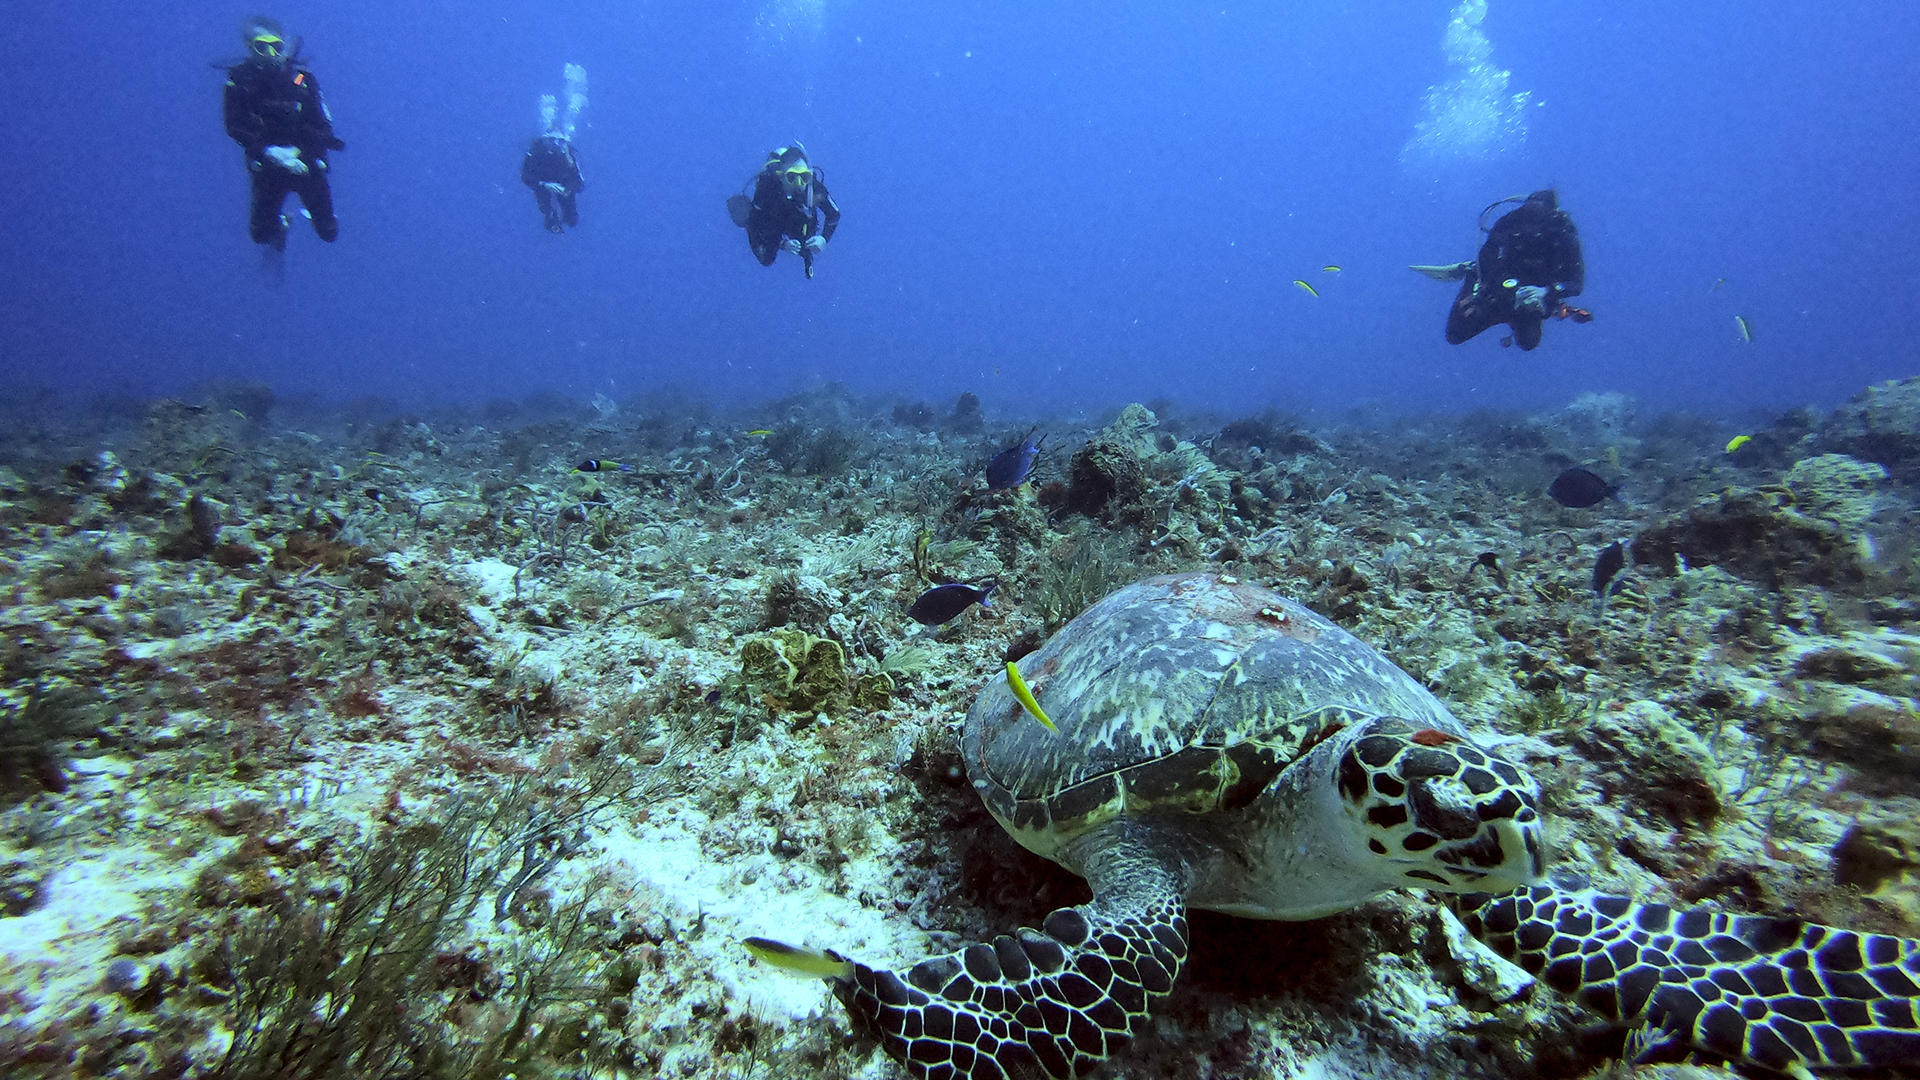 Divers float above a hawksbill sea turtle at the Tortugas dive site off the coast of Playa del Carmen.